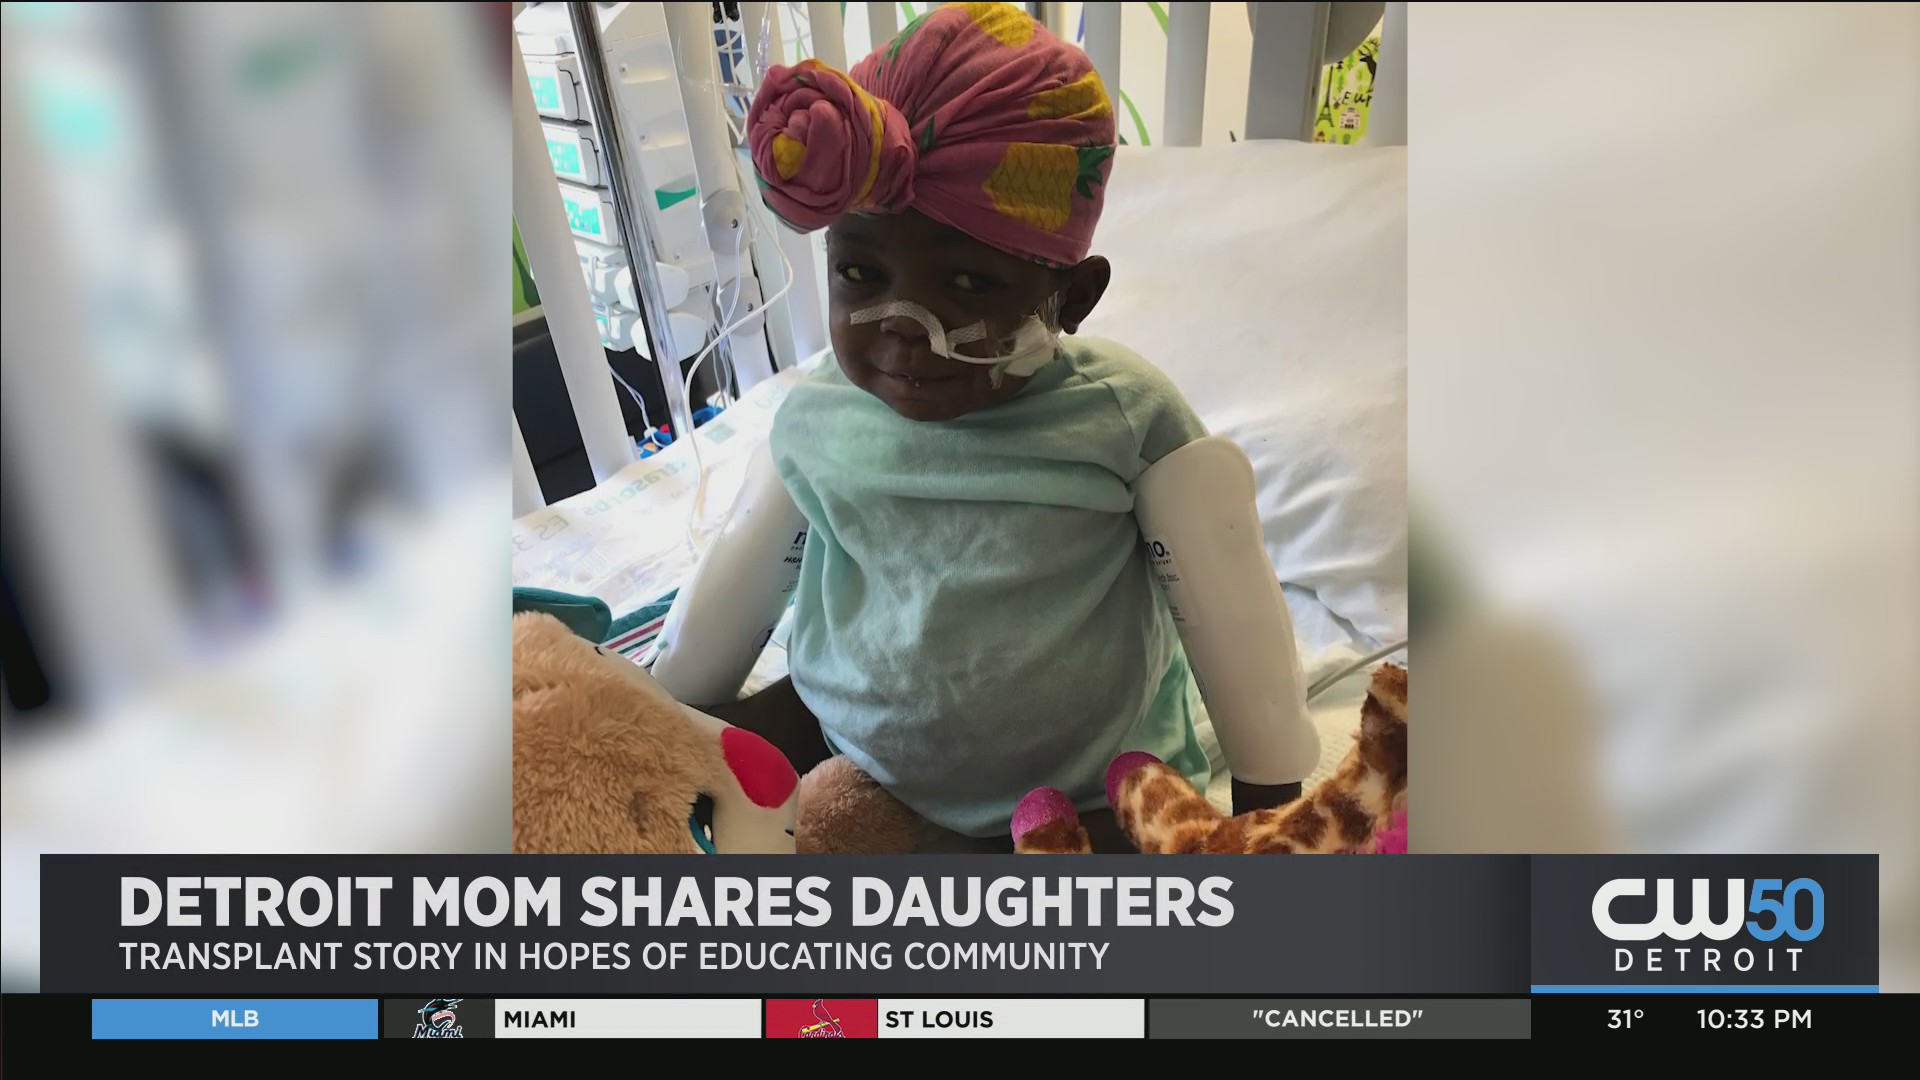 Detroit Mom Shares Story Of Daughter’s Life-Saving Transplant In Hopes Of Educating Others